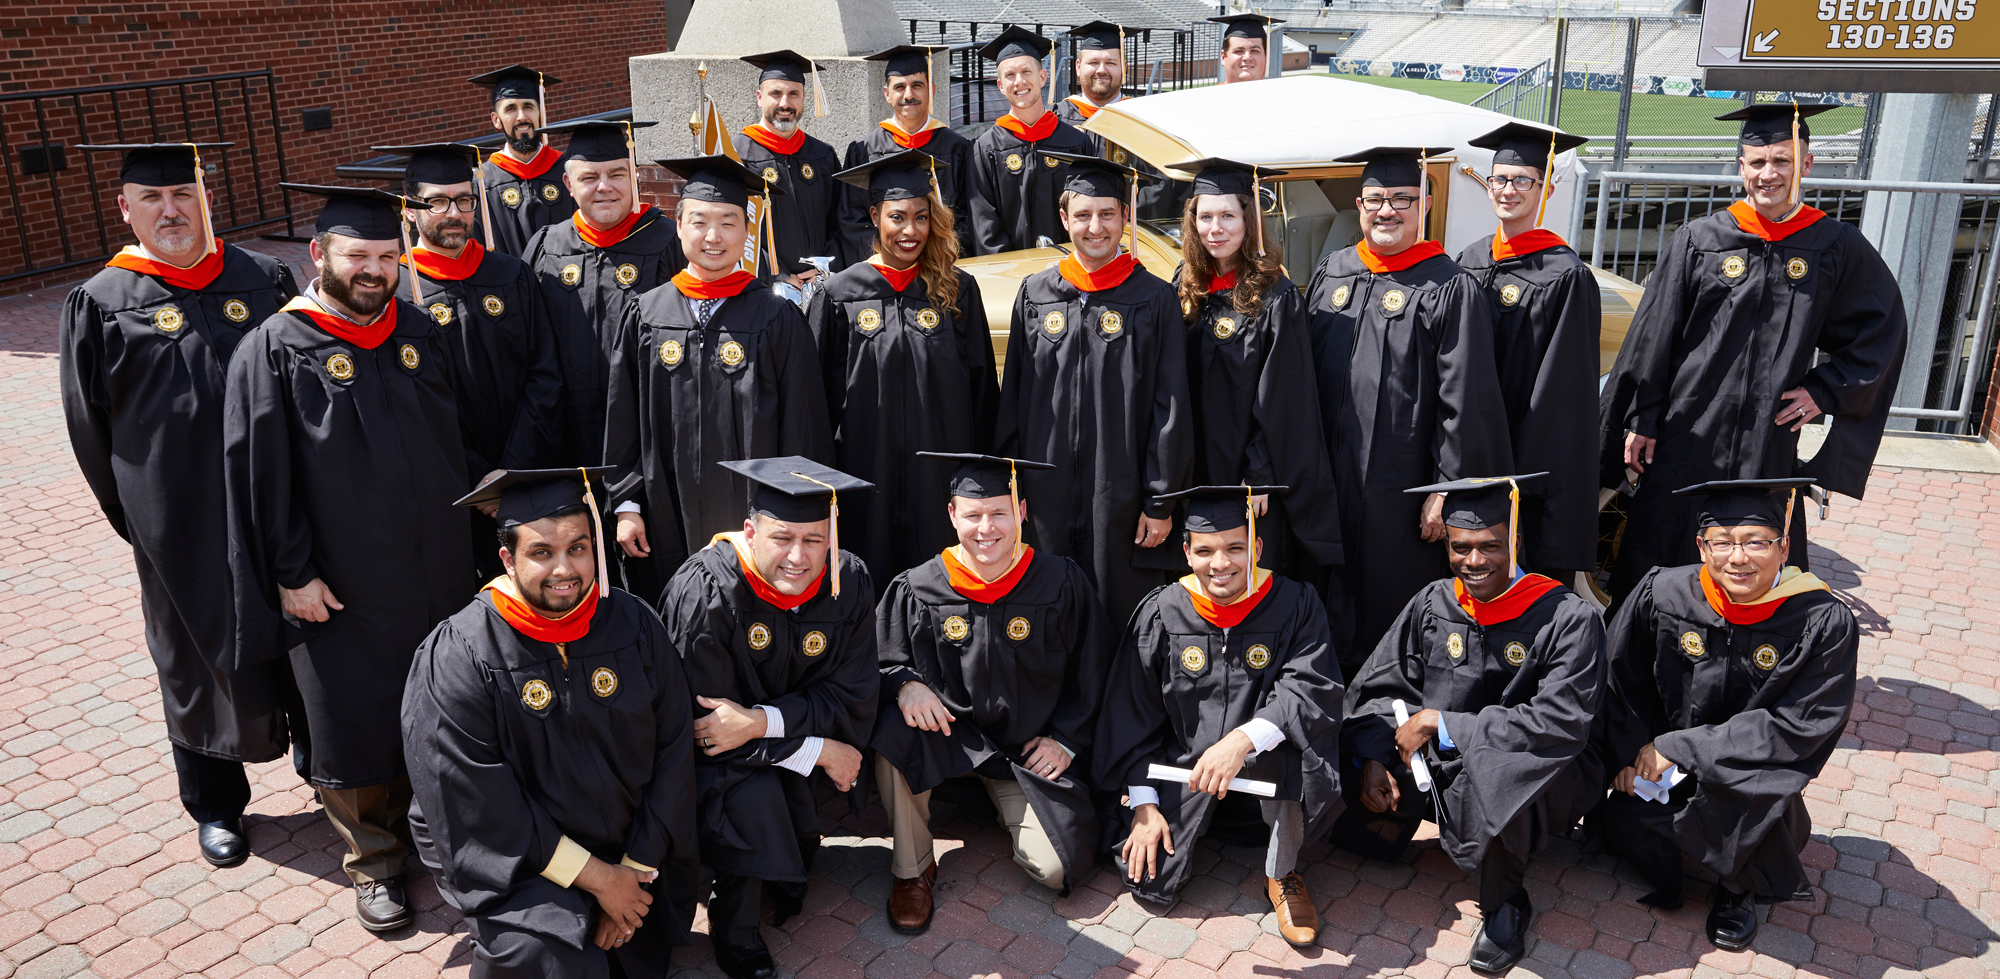 Group of Georgia Tech graduates posing in their caps and gowns